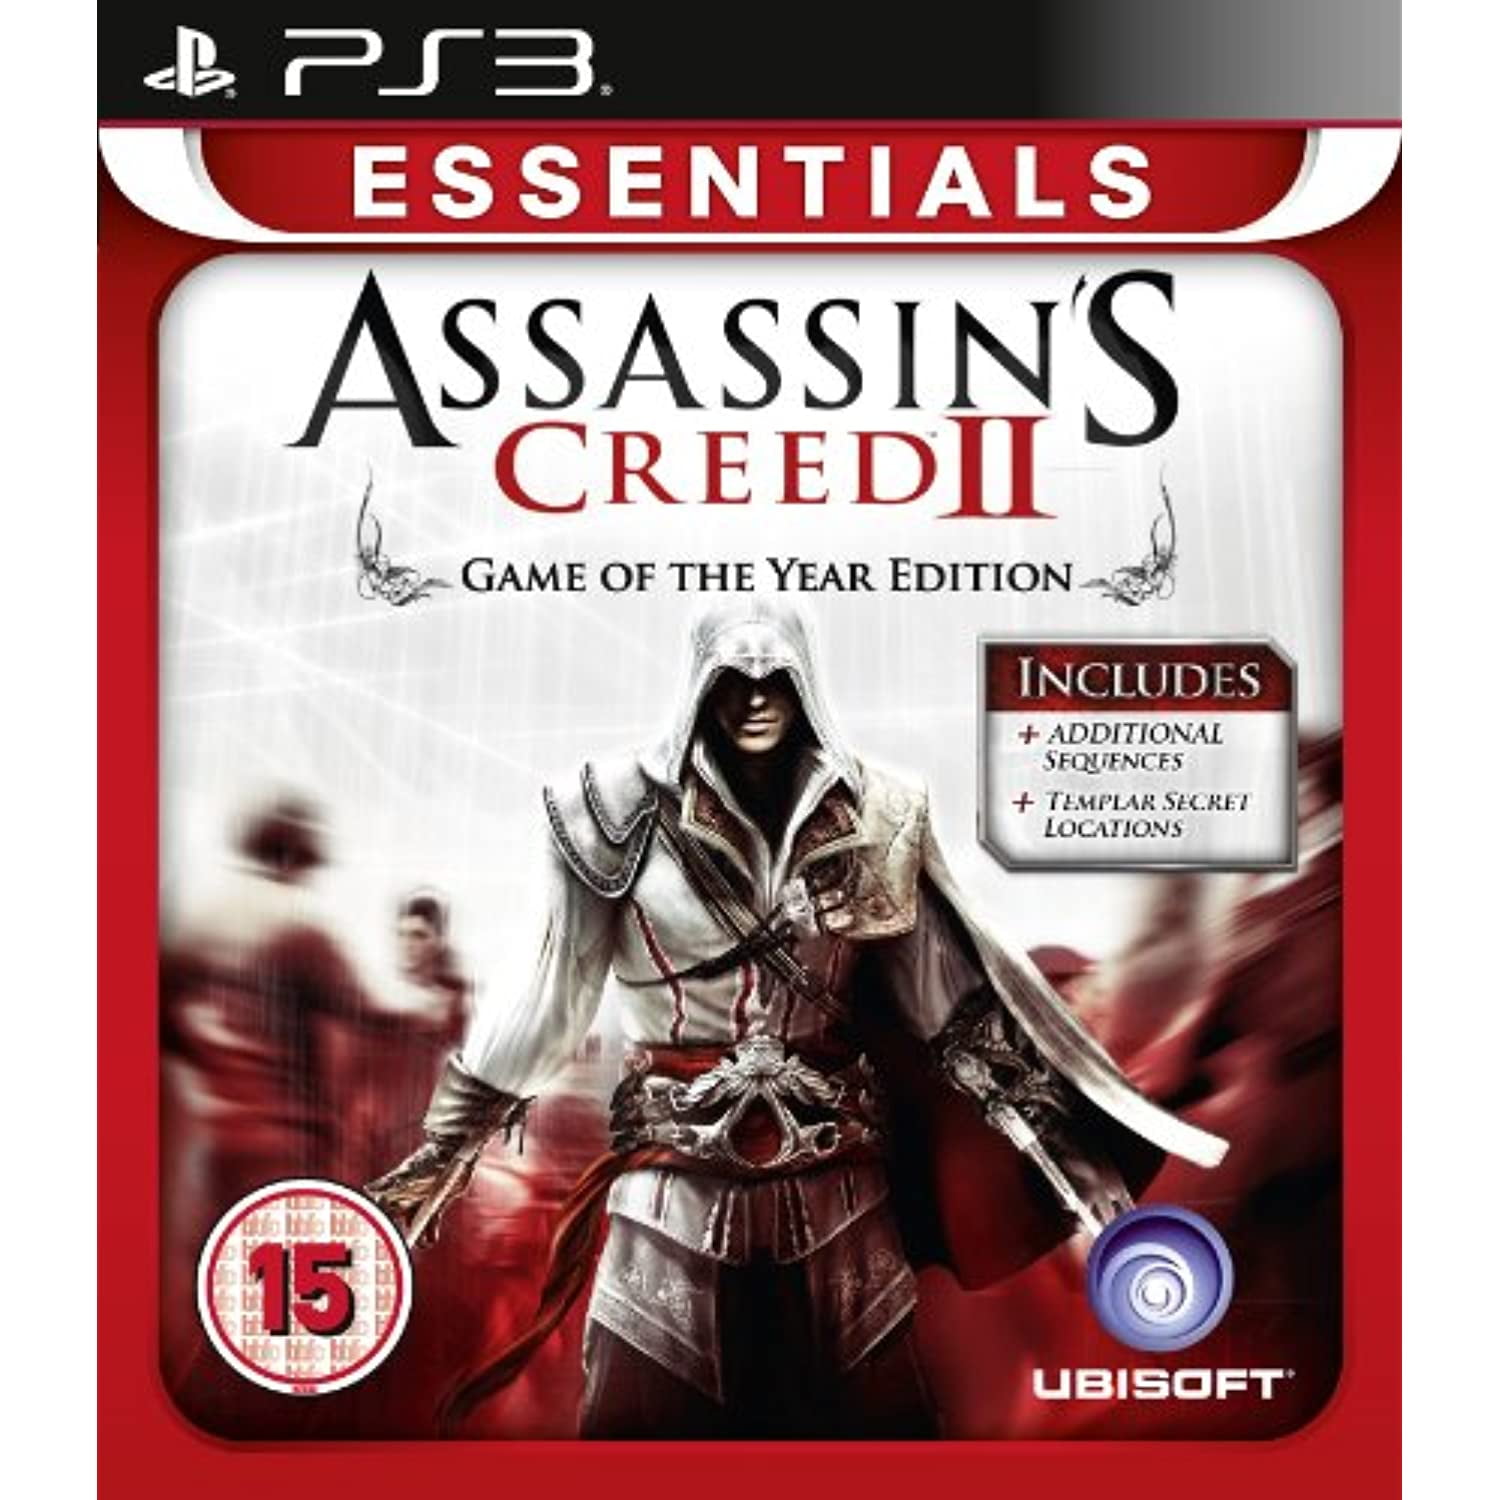 Игры на 2 ps3. Ассасин Крид 2 диск пс3. Assassin's Creed 2 на ps3 диск. Ассасин Крид диск на ПС 3. Игра Assassin's Creed(ps3).